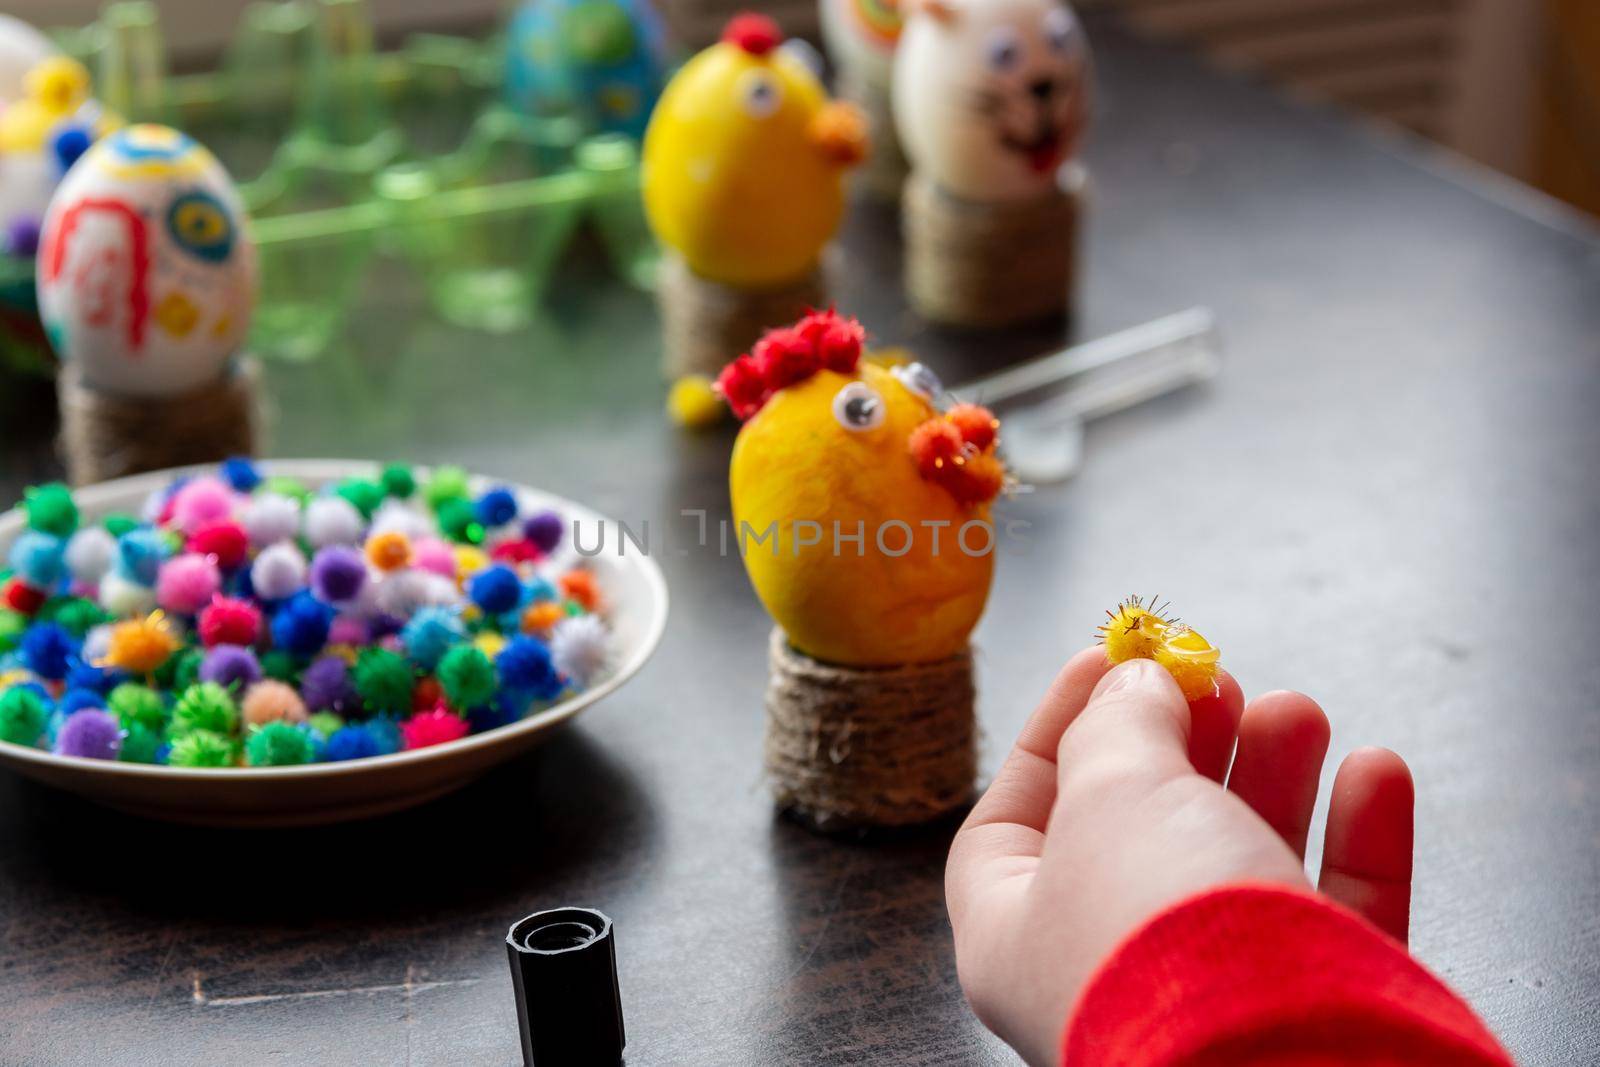 A child makes gifts with his own hands for Easter, a decorative element in the child's cancer